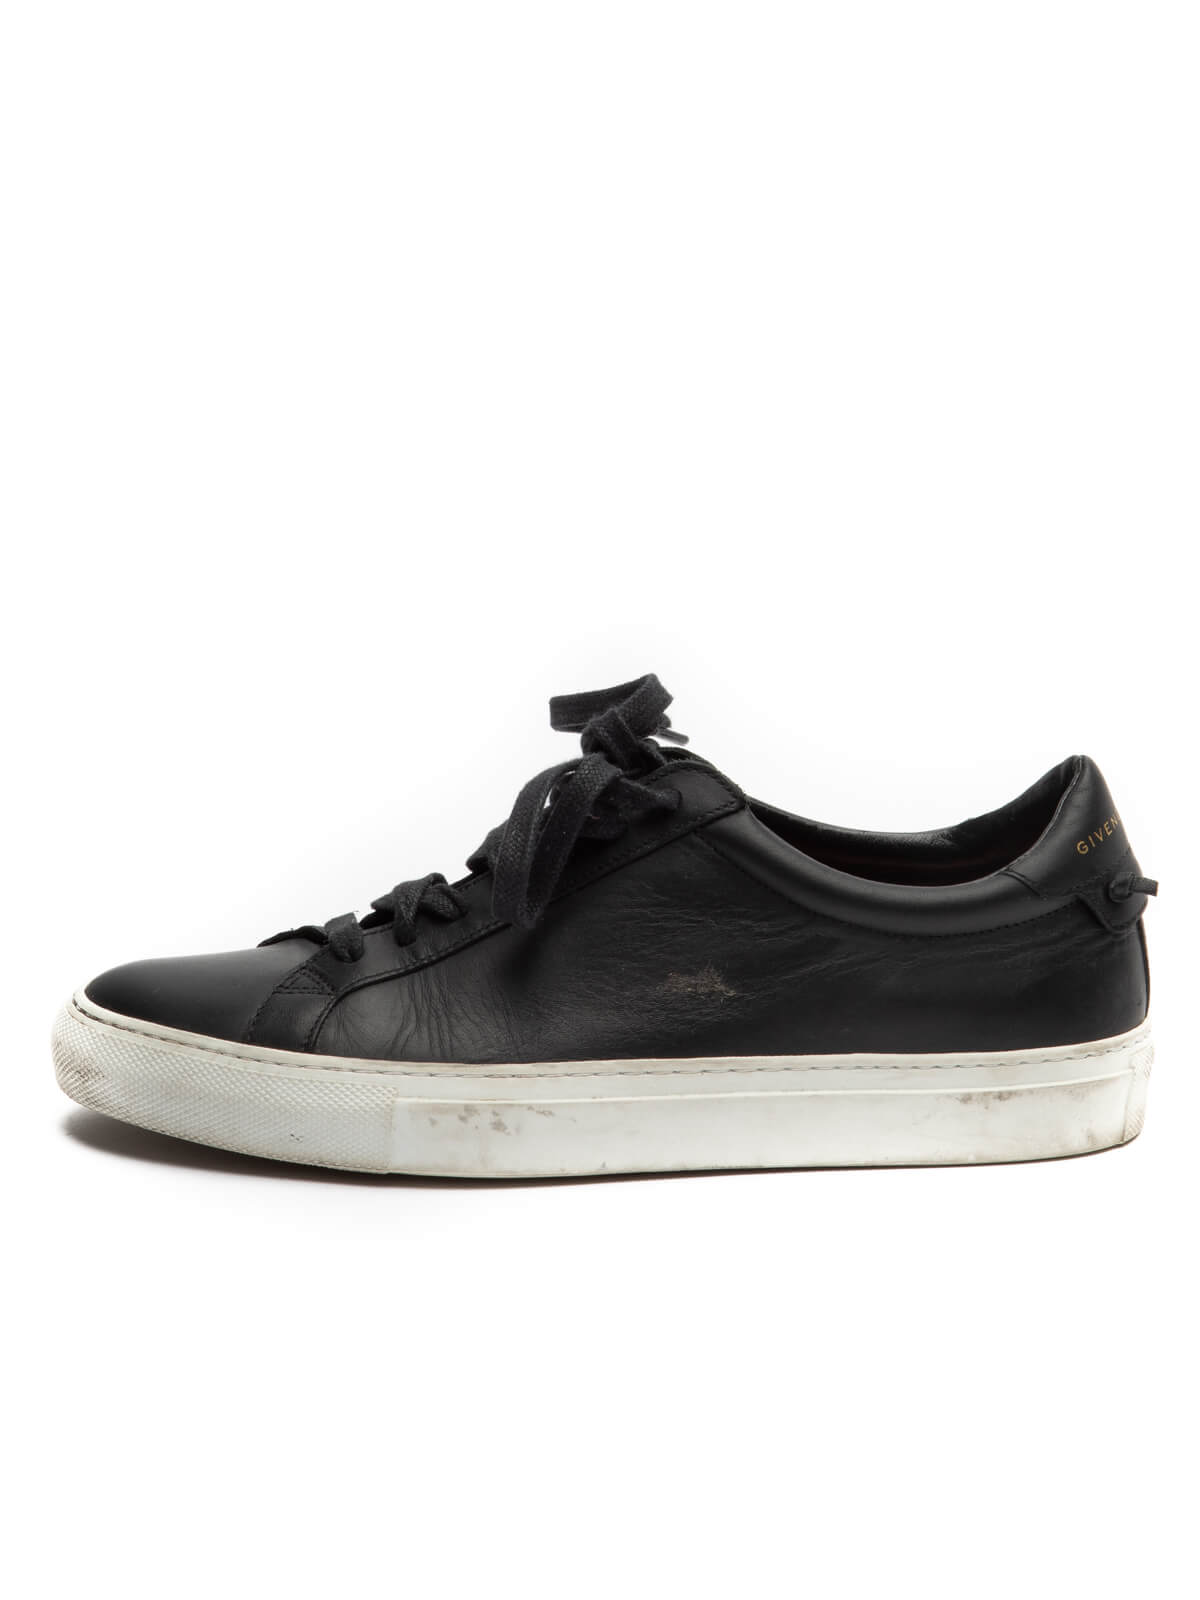 Givenchy Women's 17 Urban Street Sneakers, Size 6 UK, Black Leather